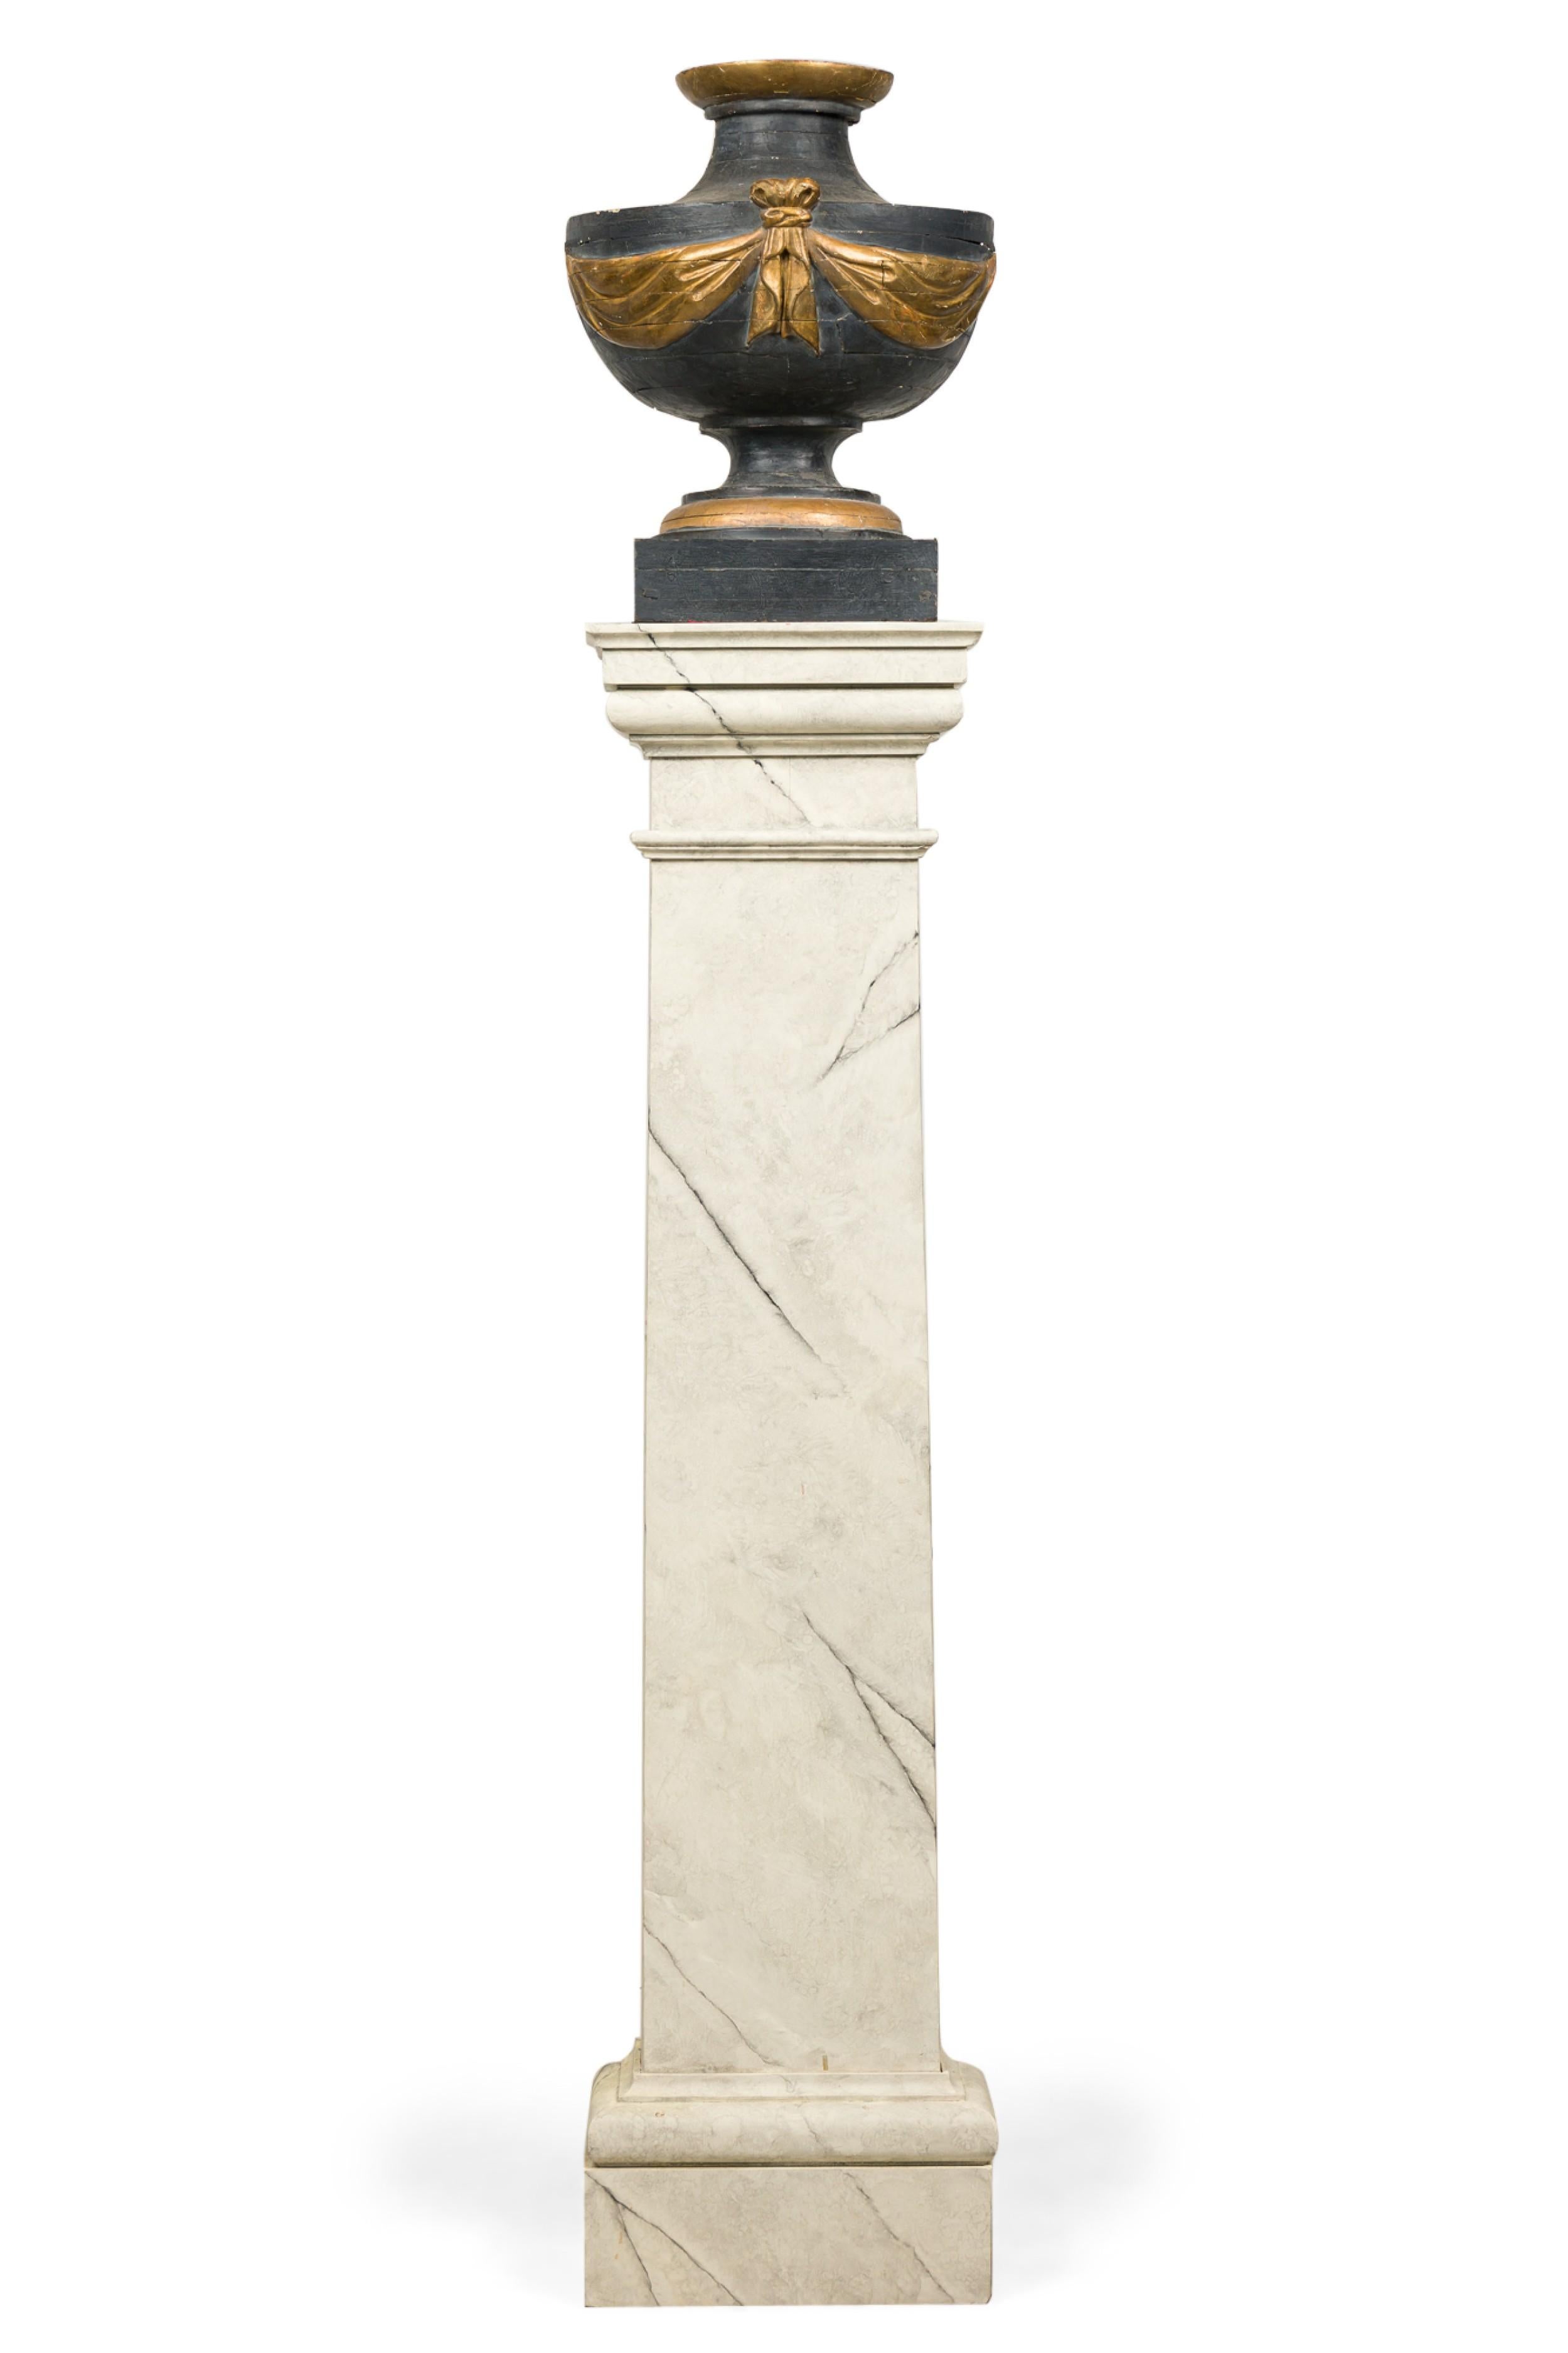 PAIR of Italian Neo-classic (19th Century) pilasters /pedesals having ablack painted urn with gold painted and parcel-gilt swag and trim mounted on faux white painted marble pedestals (PRICED AS PAIR)
